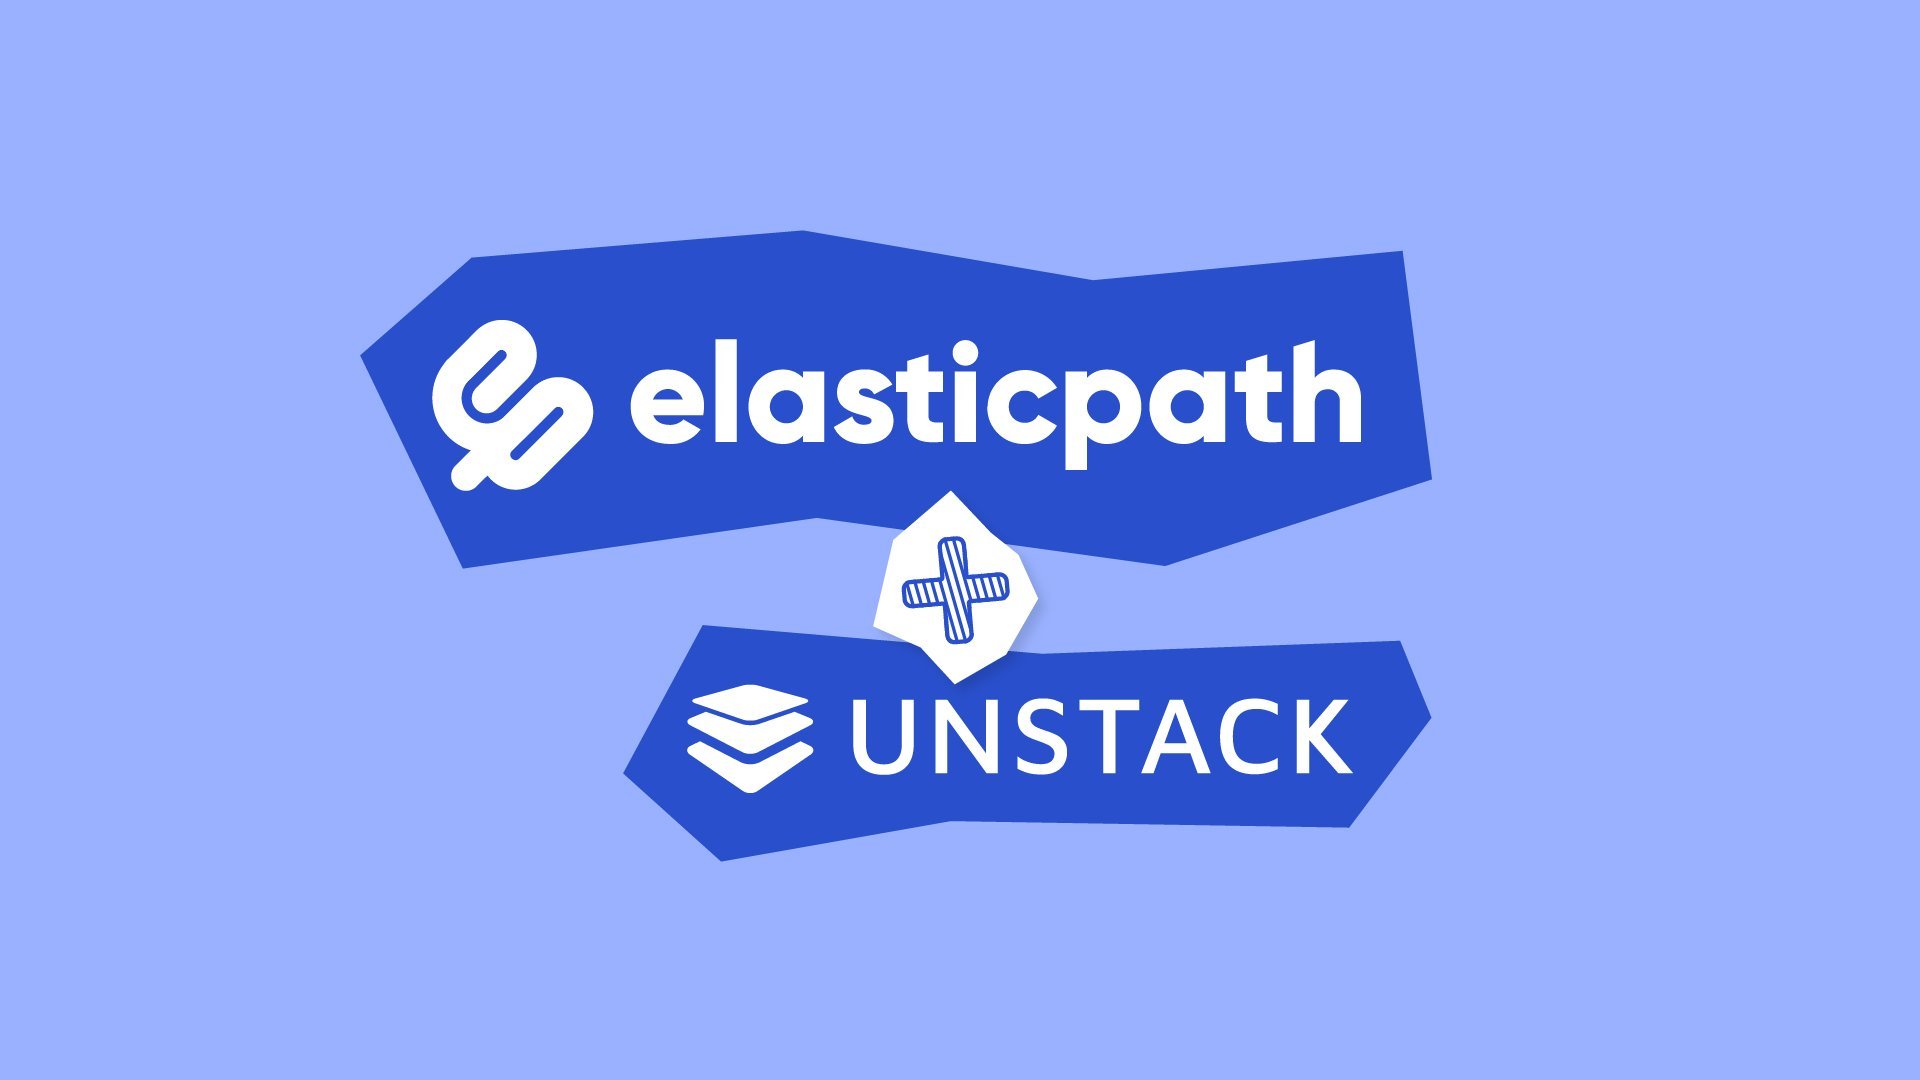 The Elastic Path and Unstack logos stacked atop one another.